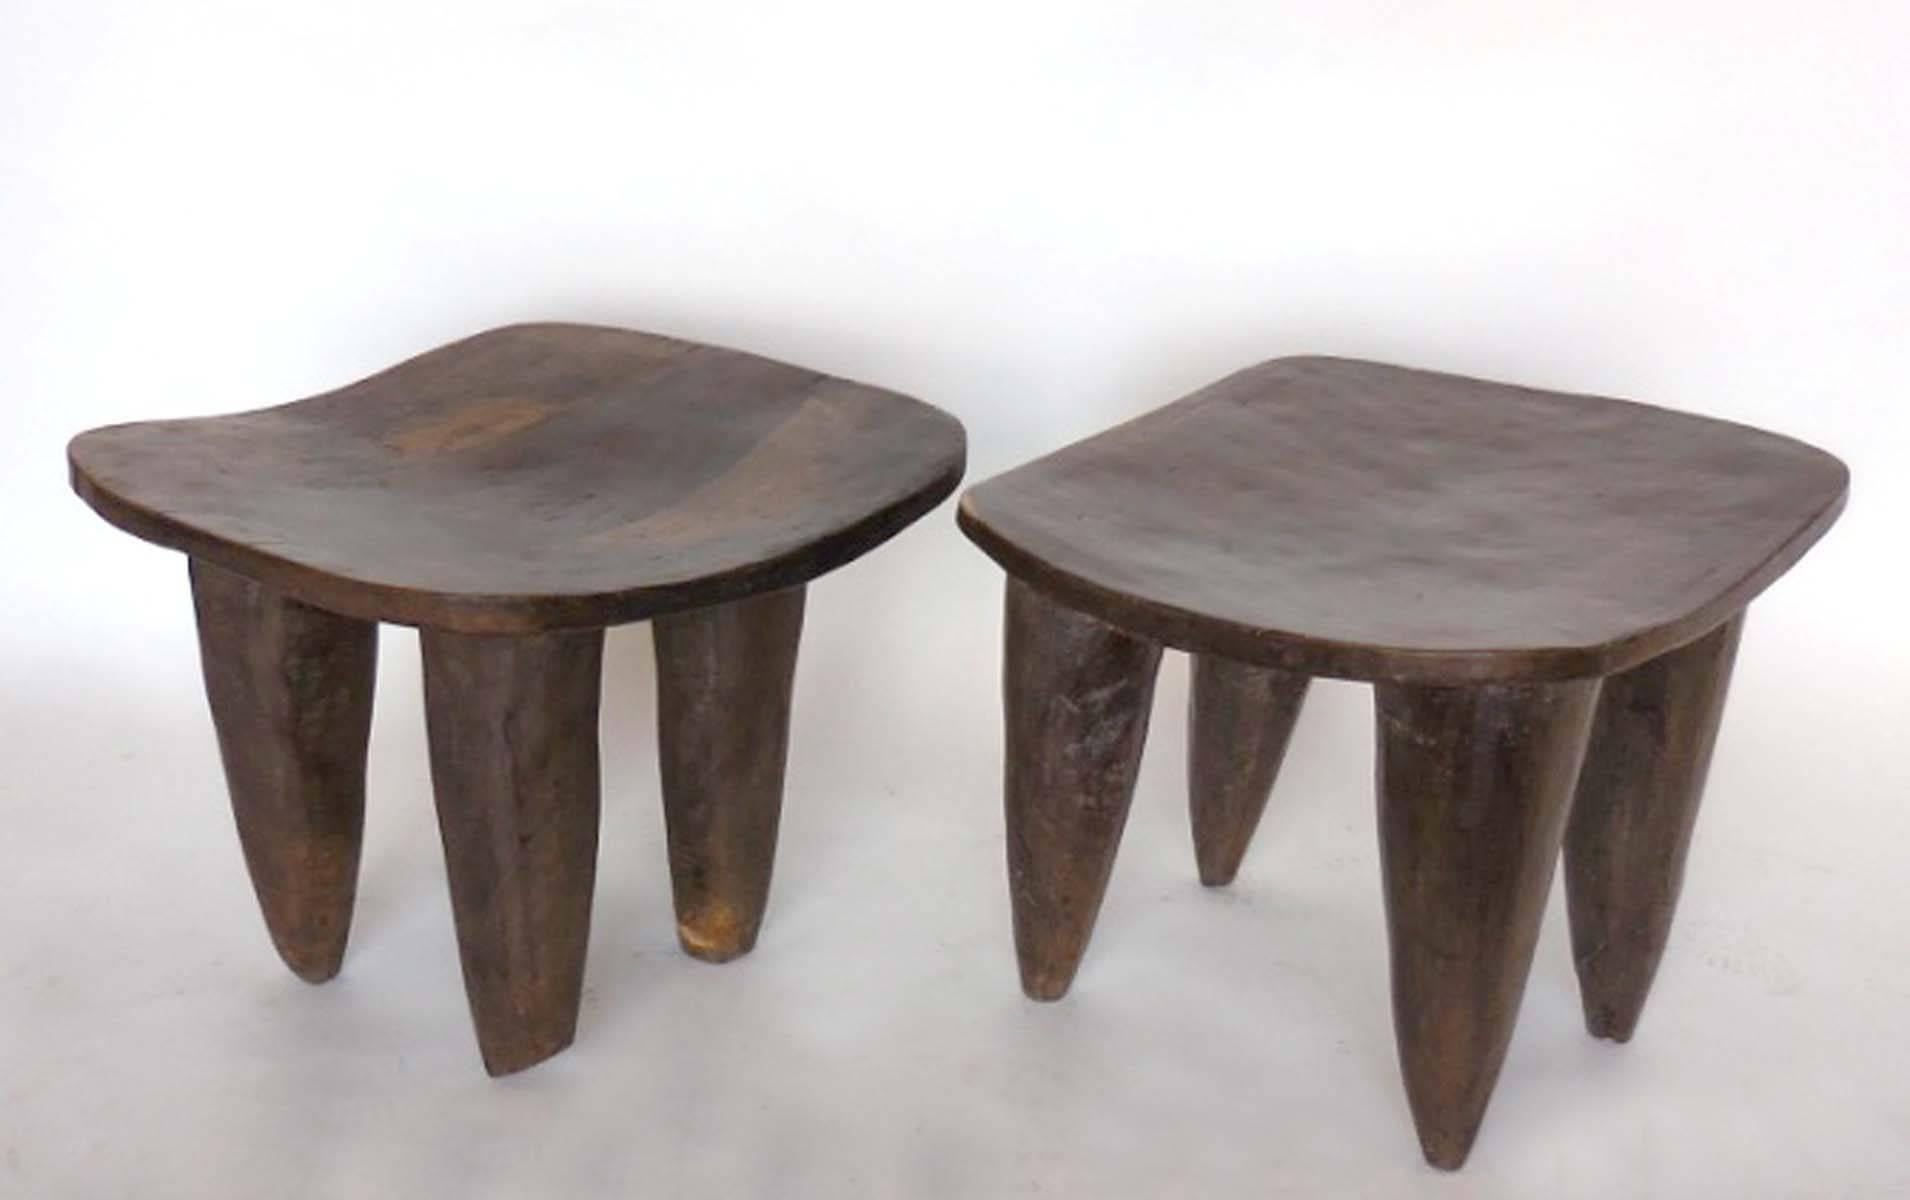 Wood Tribal Hand-Carved Stools from Mali